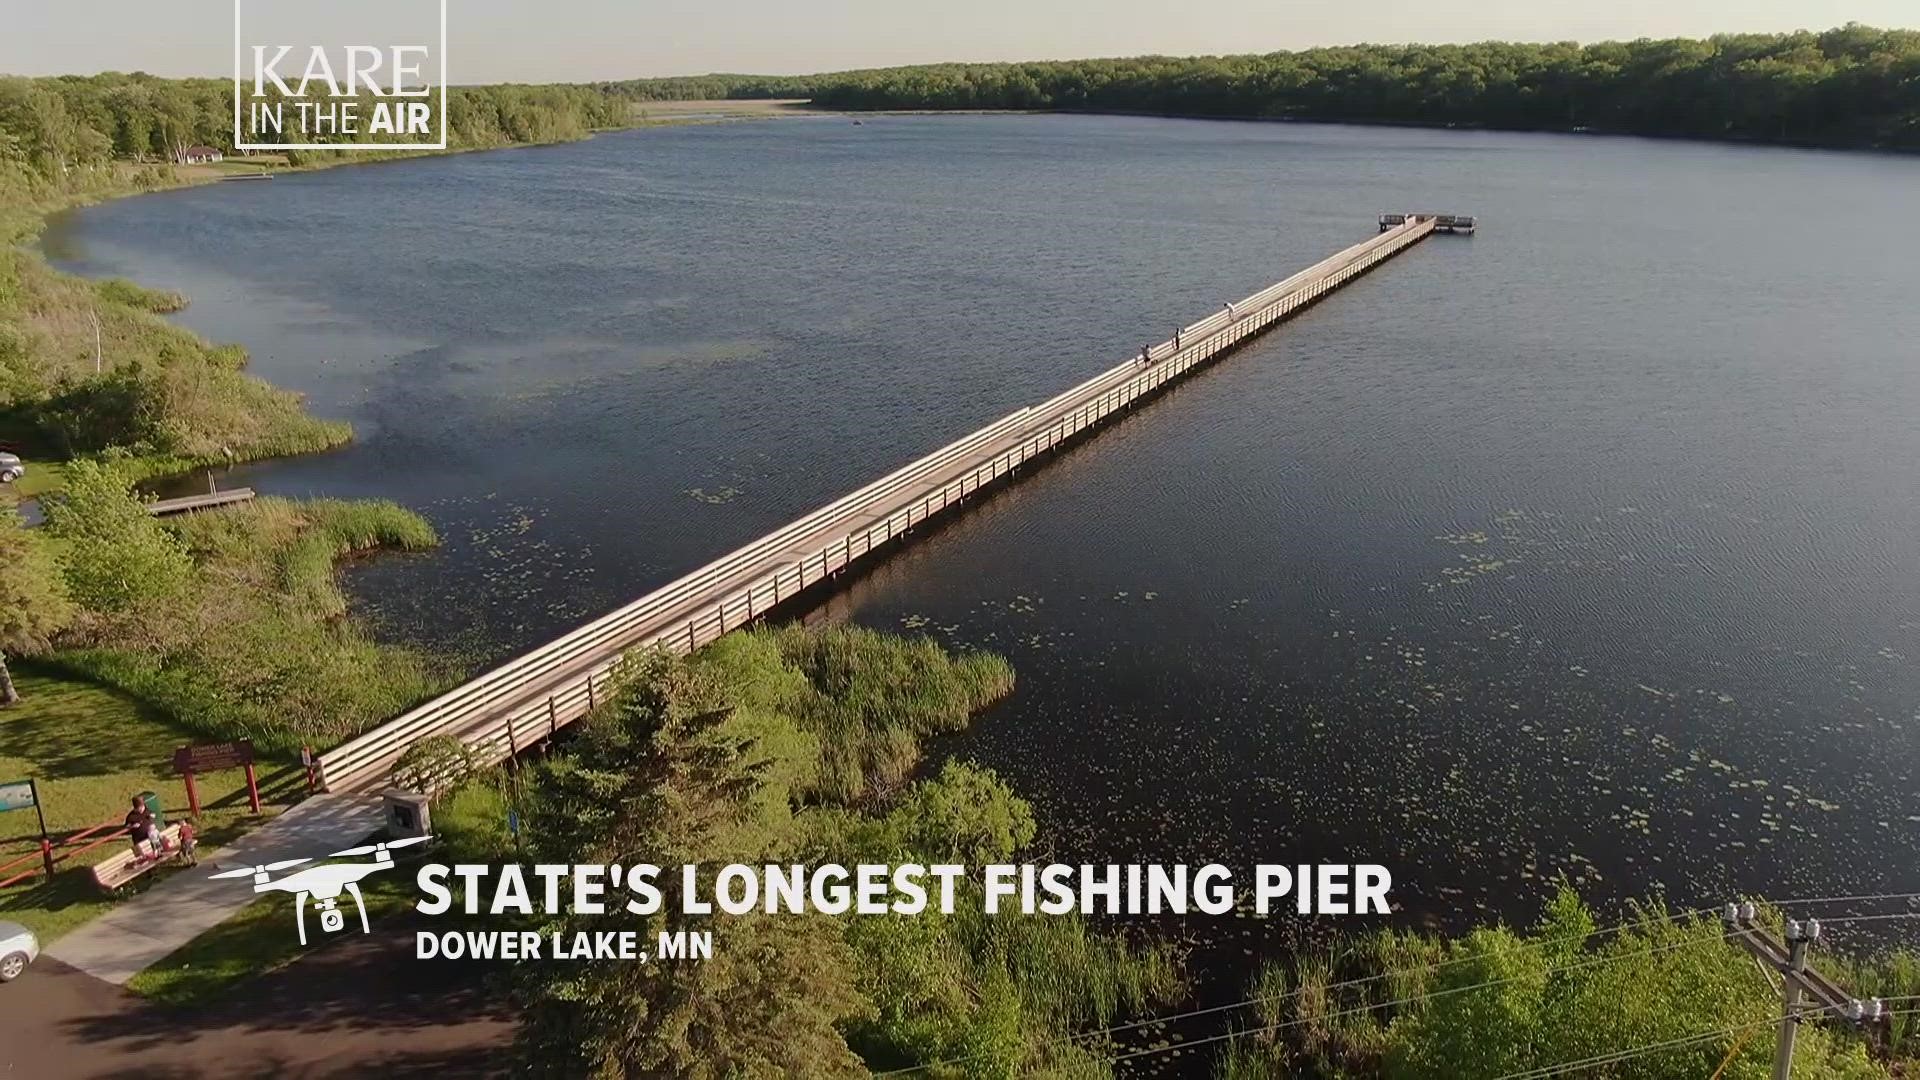 If someone tells you to "take a long walk off a short dock," the Dower Lake pier is not the one you want. We're talking about 612 feet of fishing space.